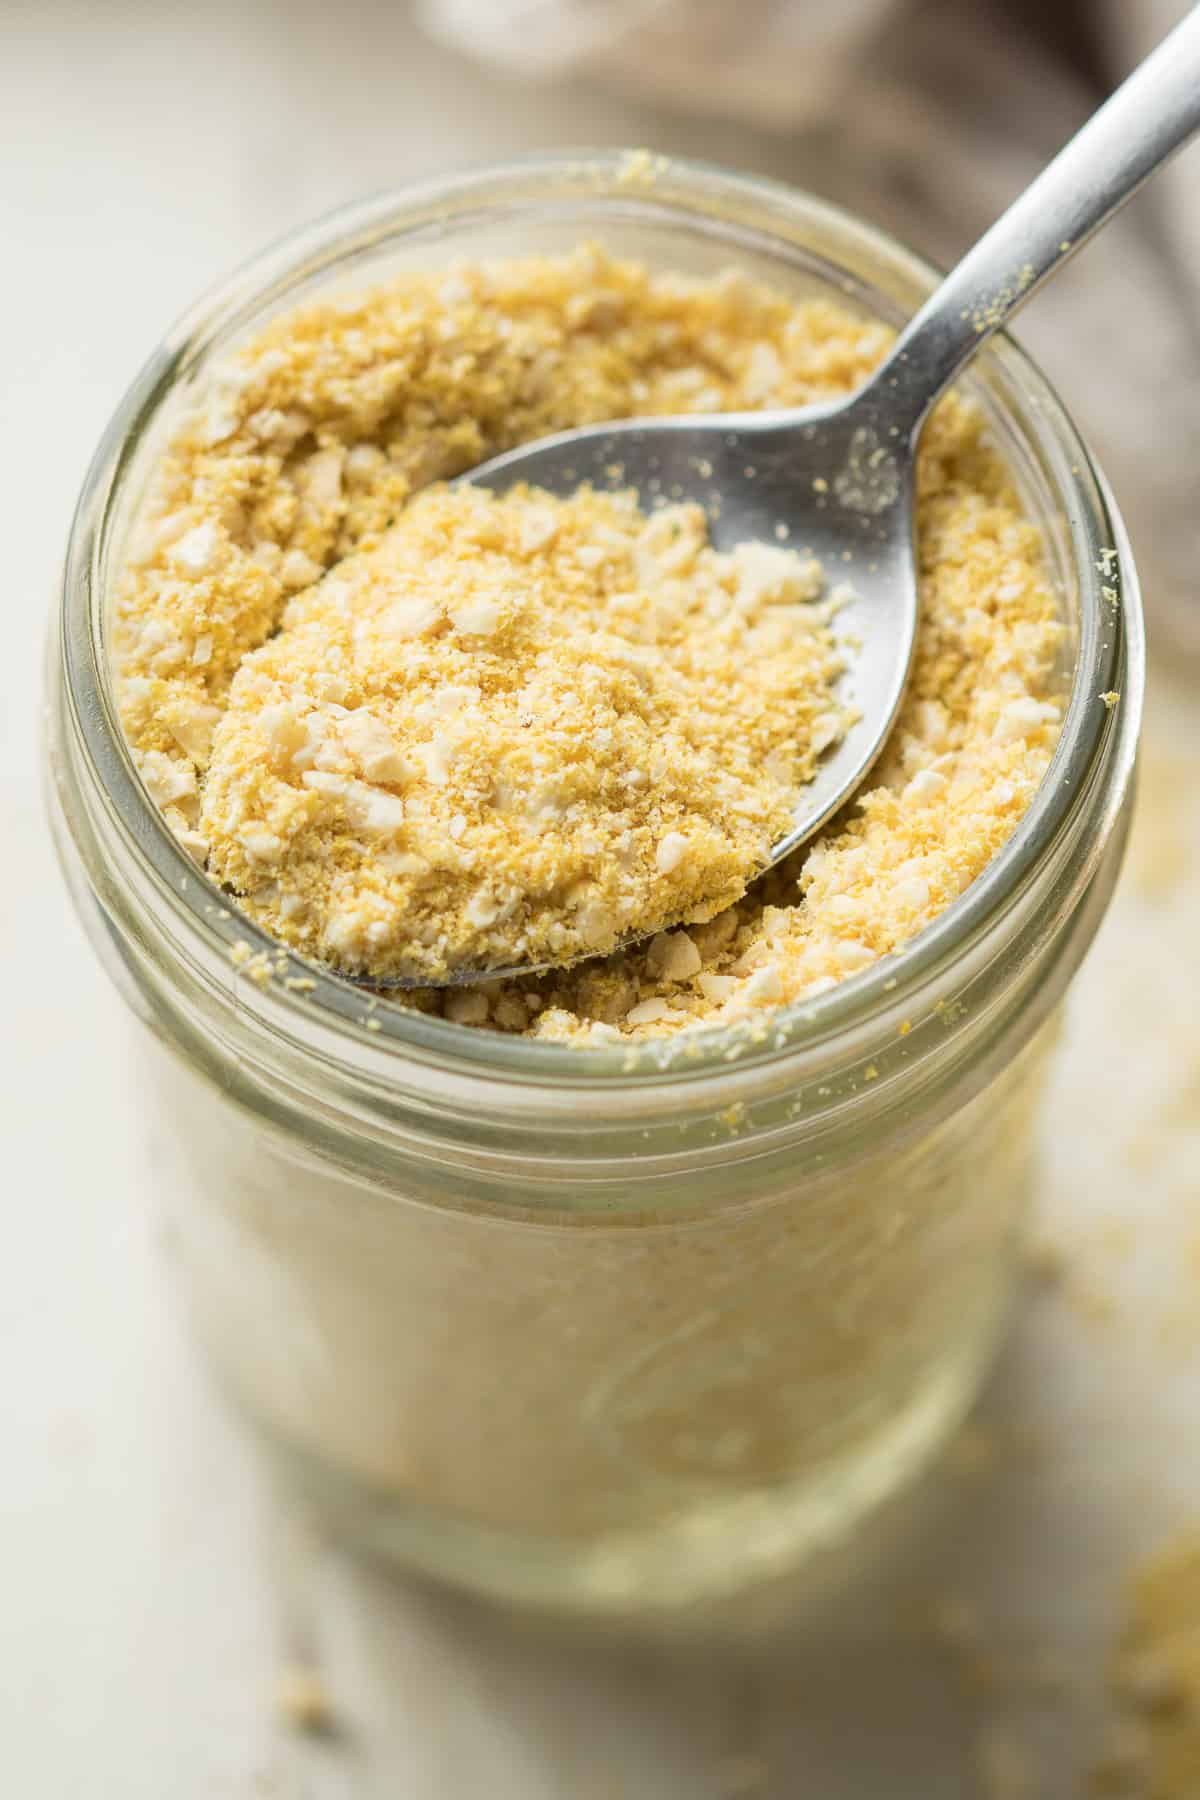 Spoon Scooping Vegan Parmesan Cheese from a Jar